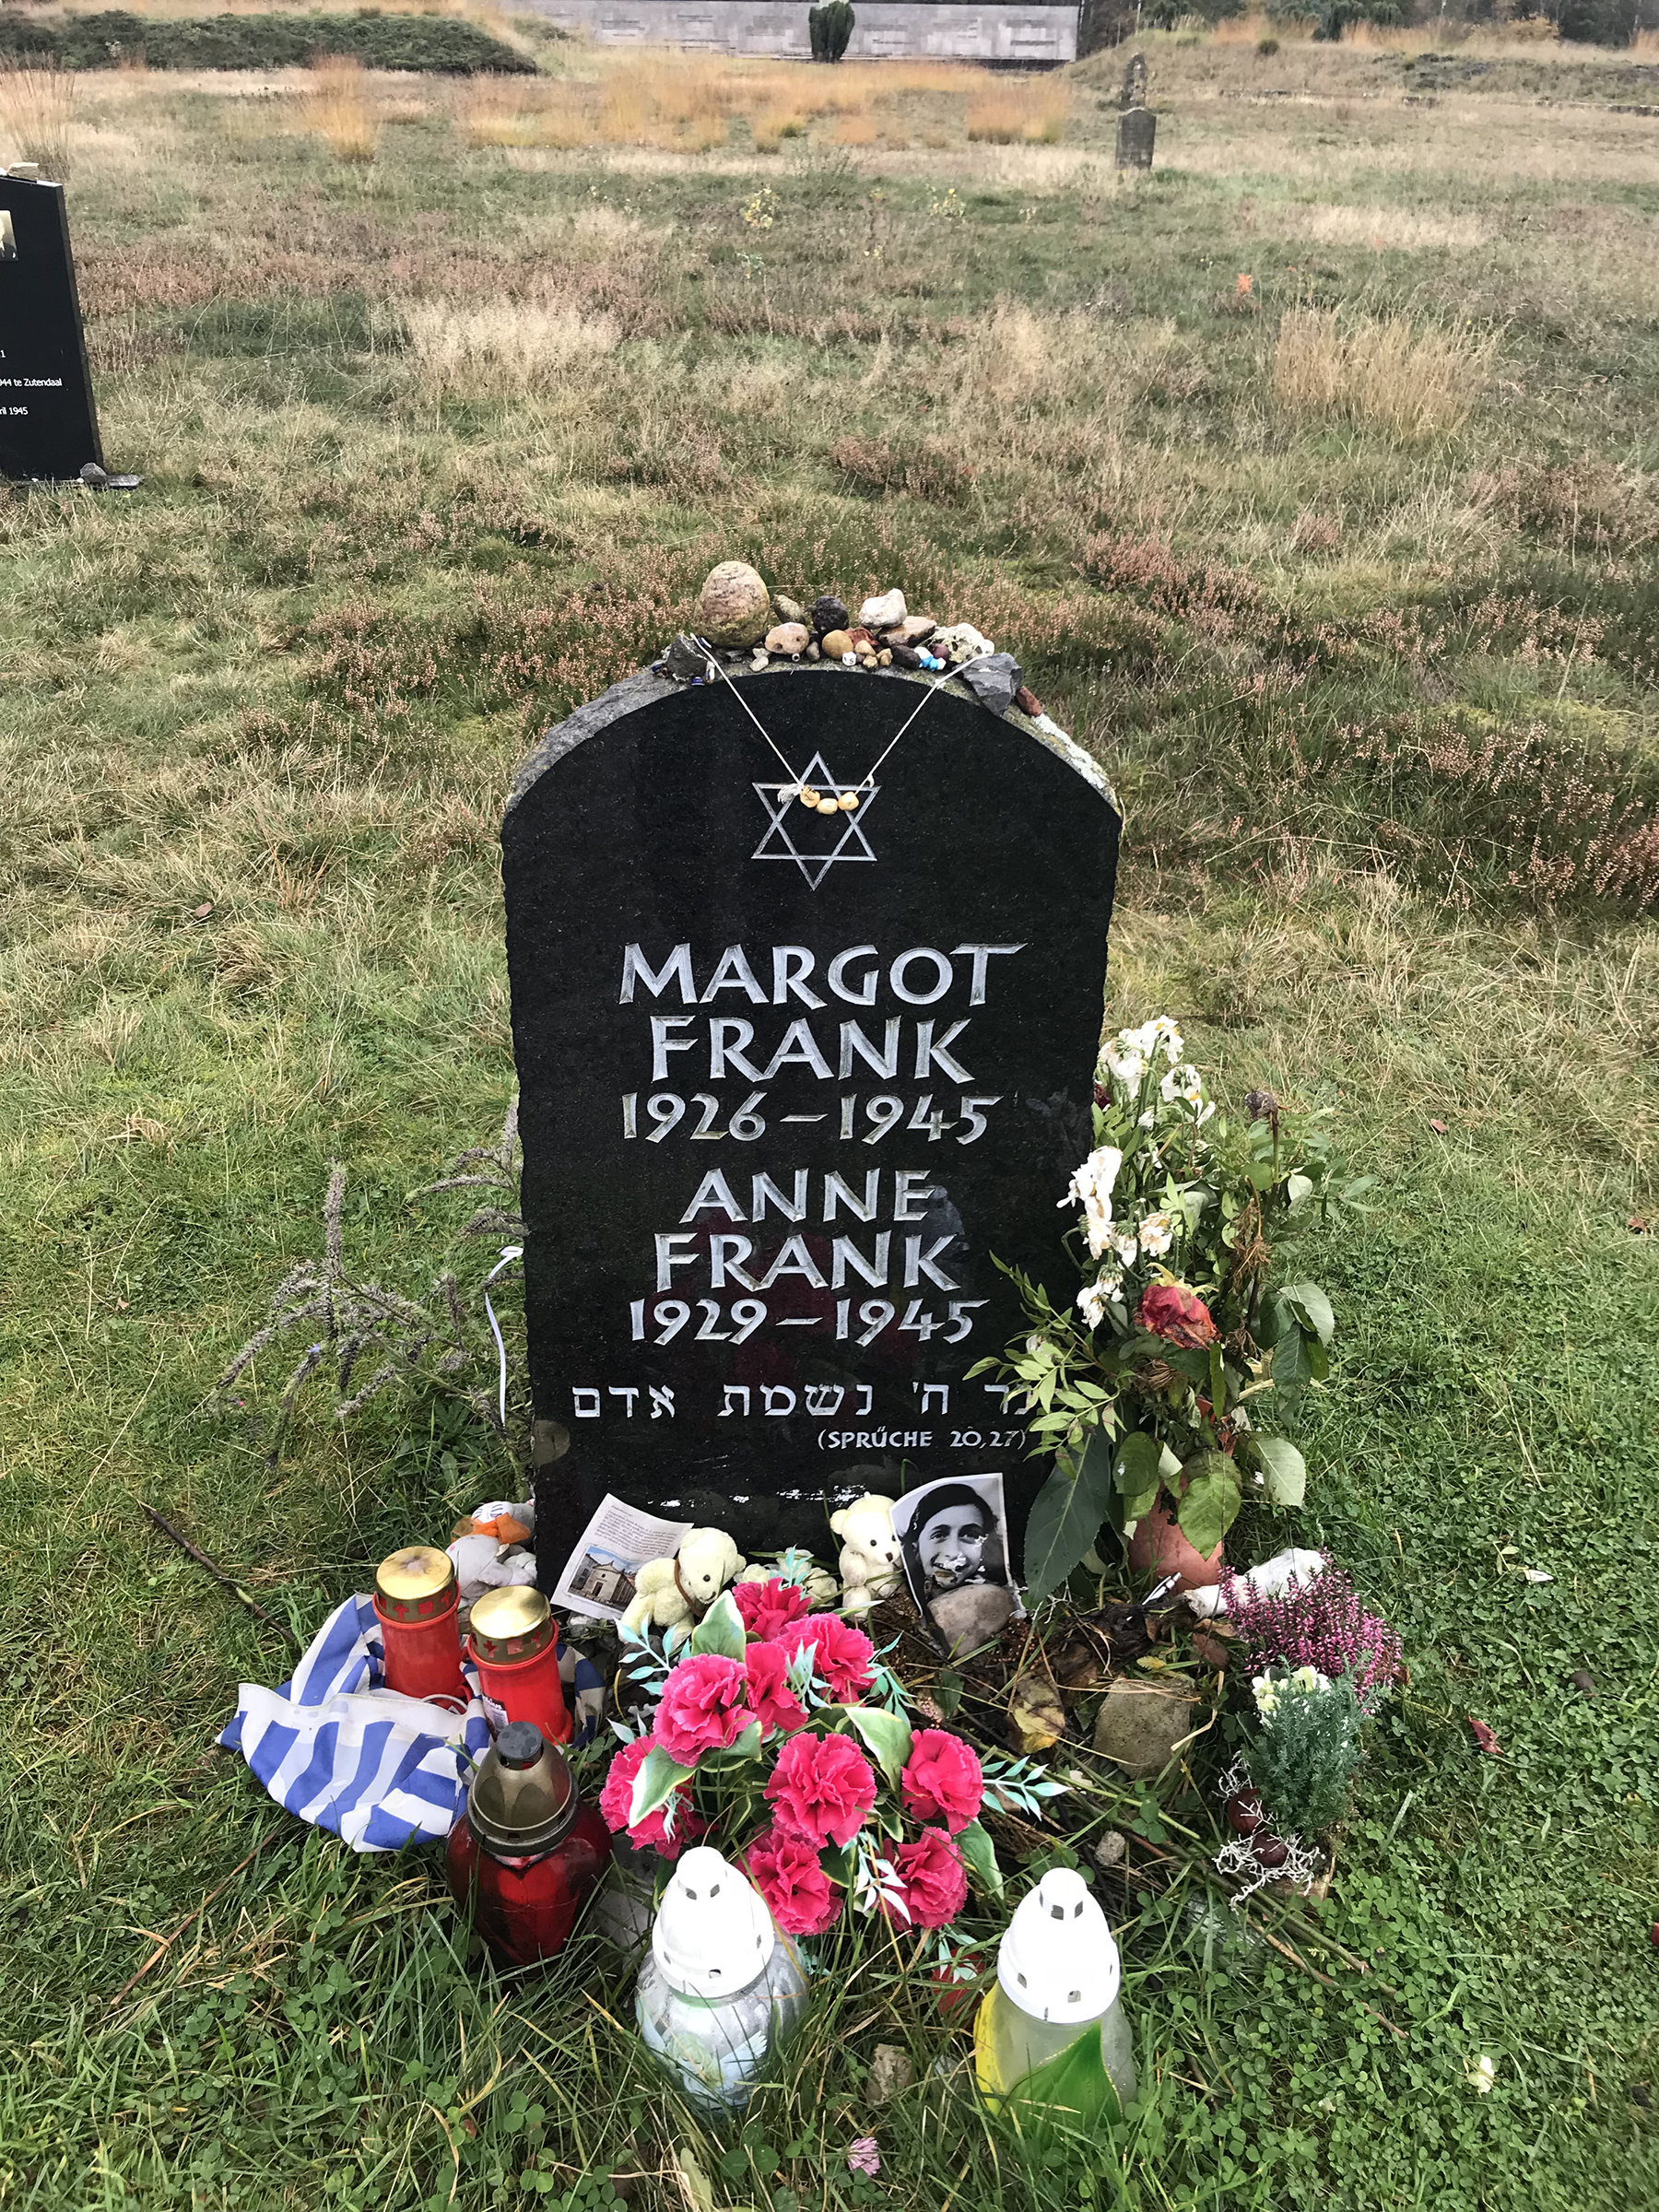 Margot and Anne Frank's tombstone.